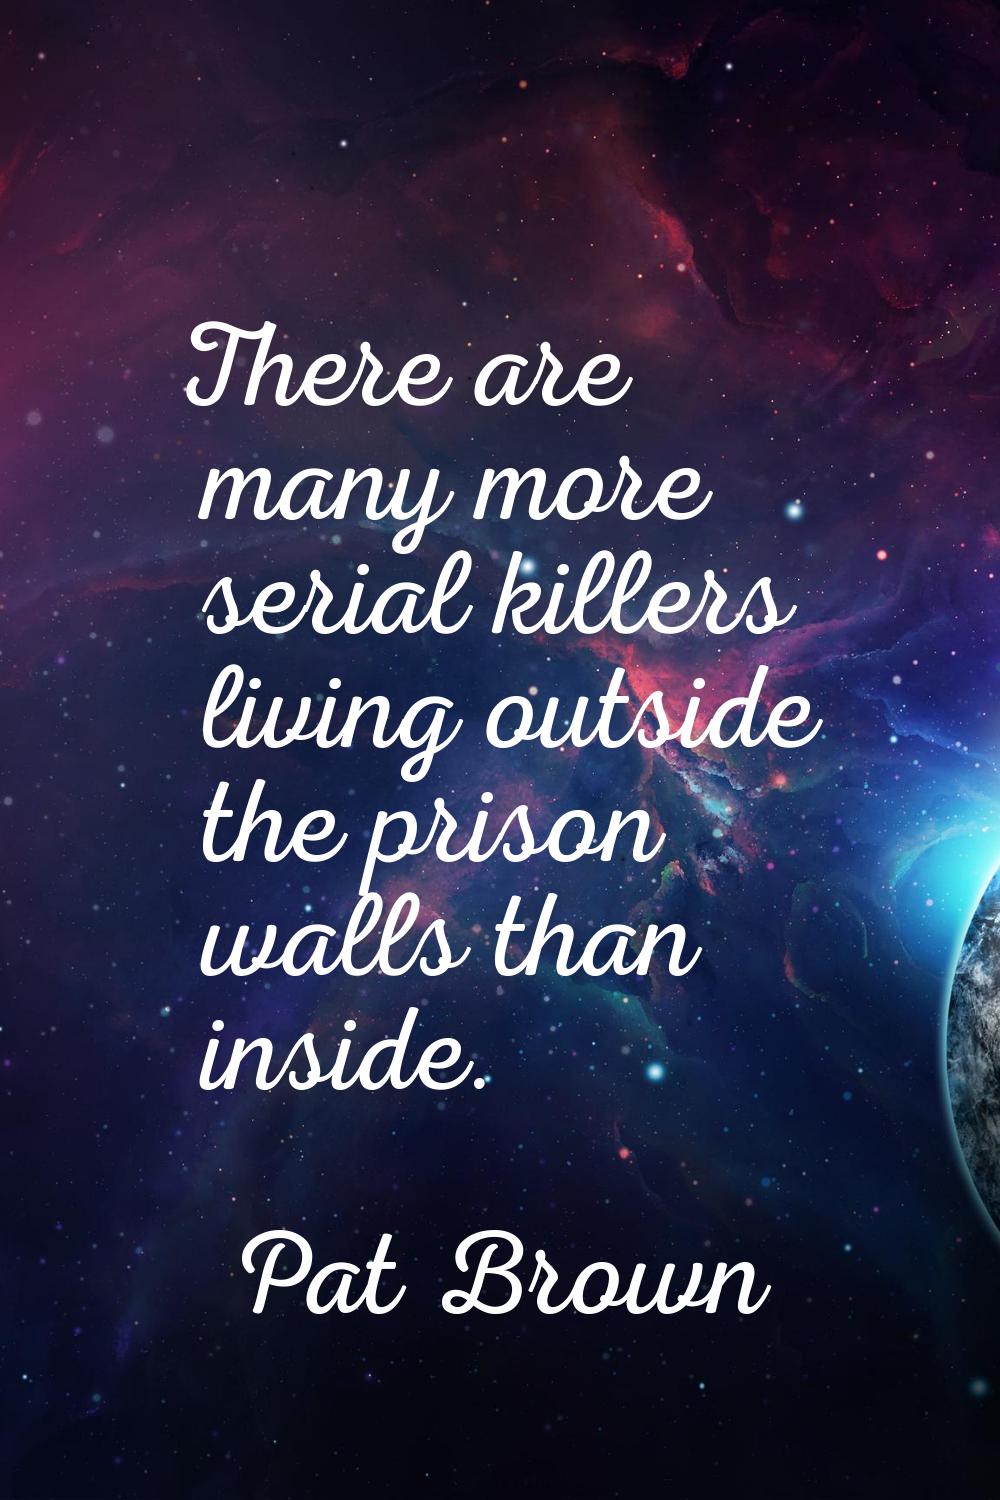 There are many more serial killers living outside the prison walls than inside.